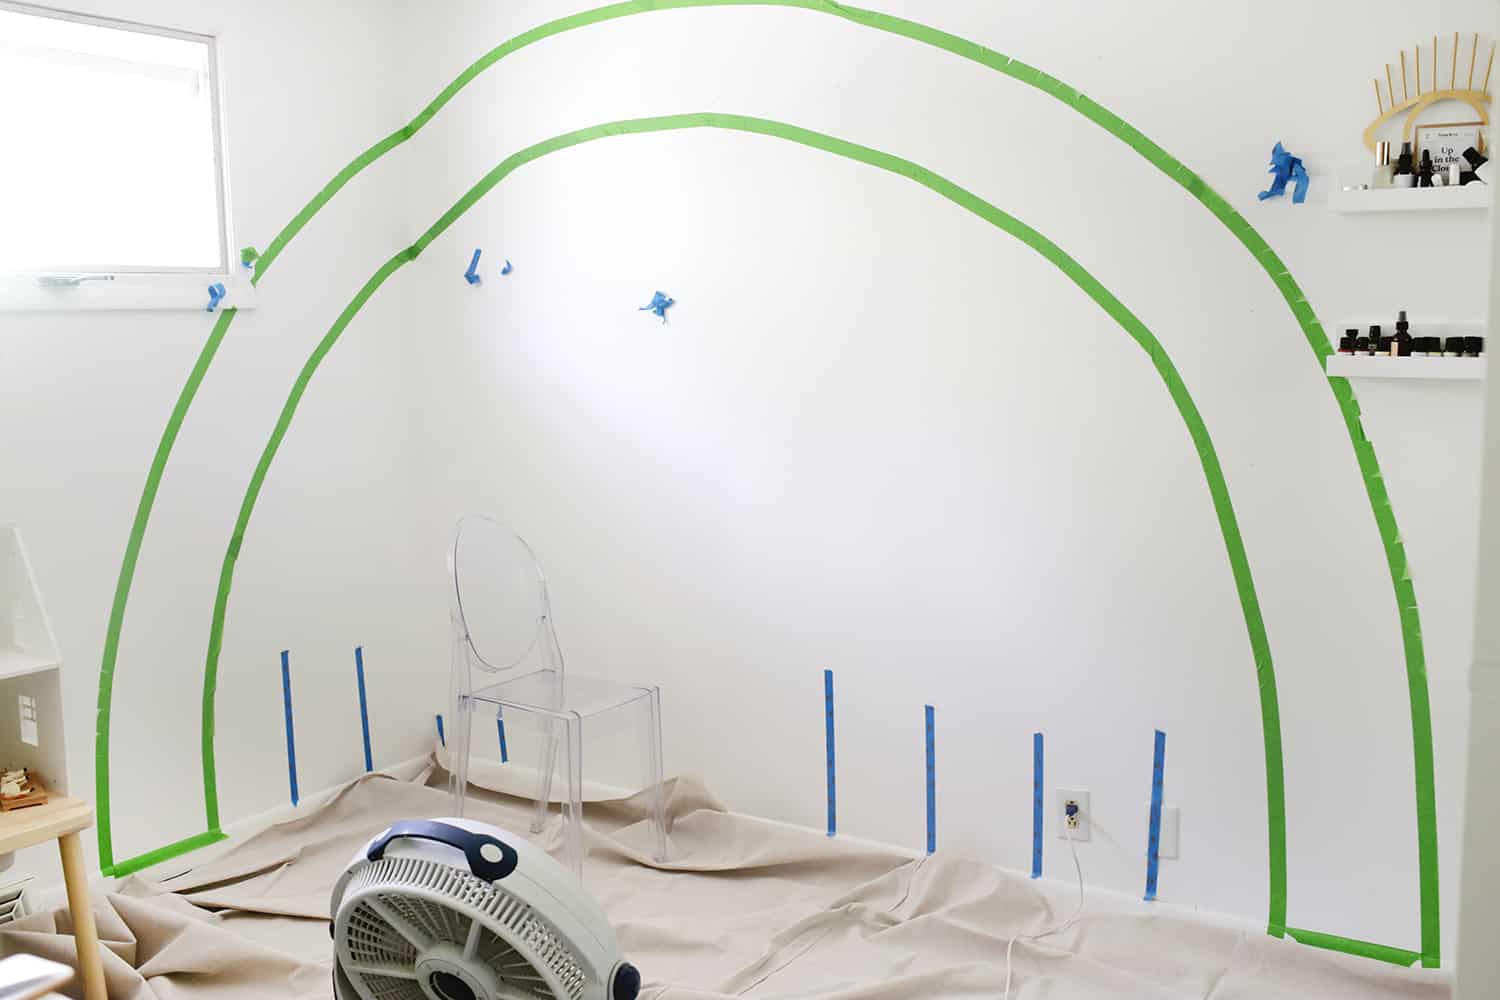 green painters tape outling the loop of the rainbow on the wall